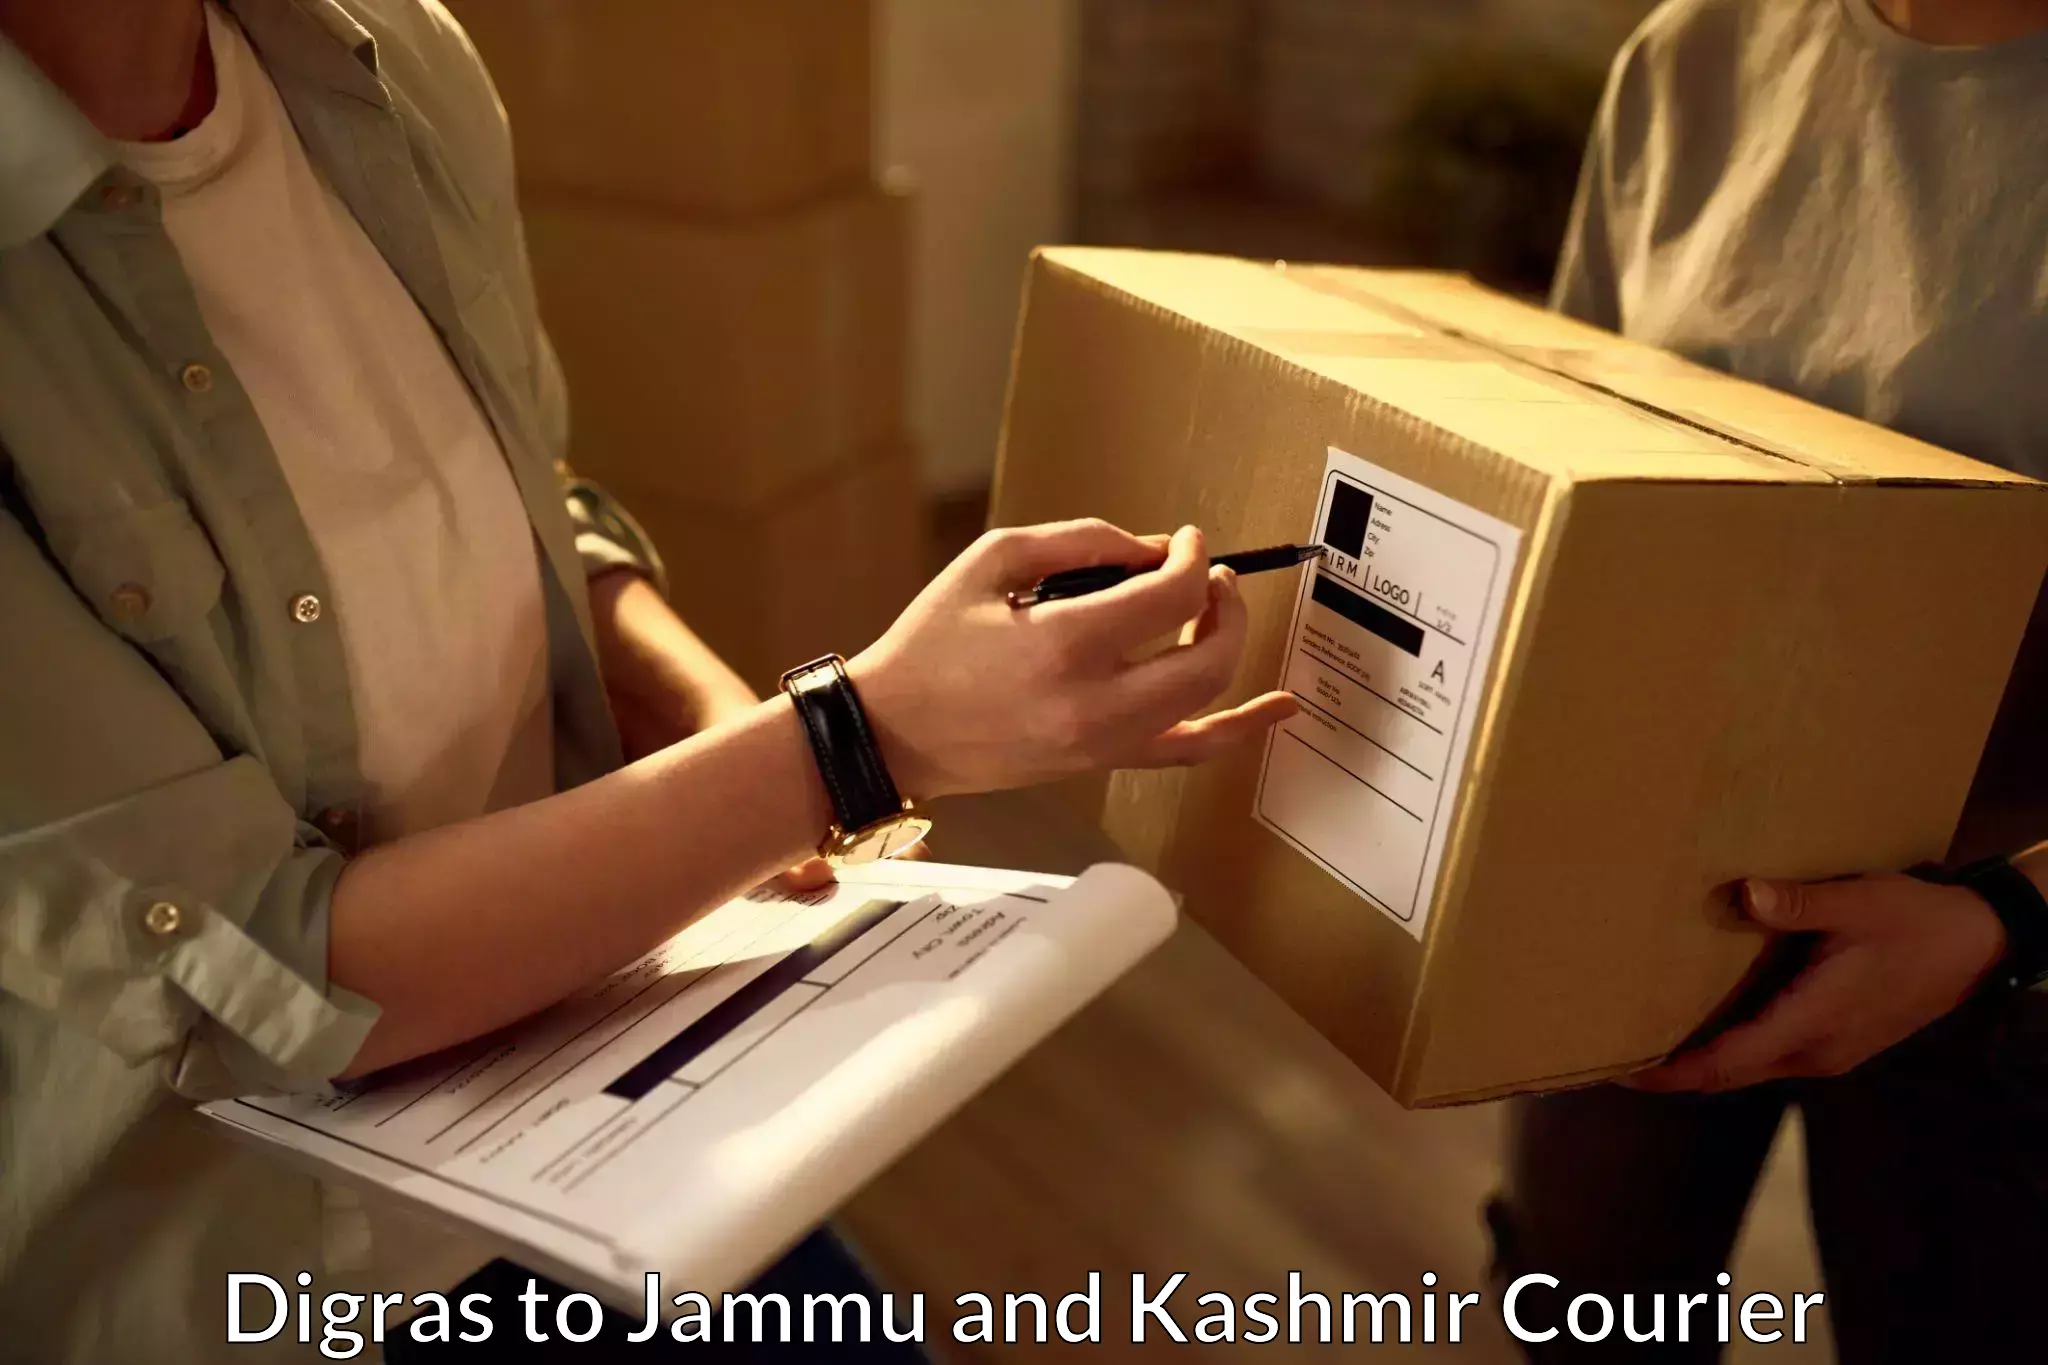 Multi-national courier services Digras to Baramulla